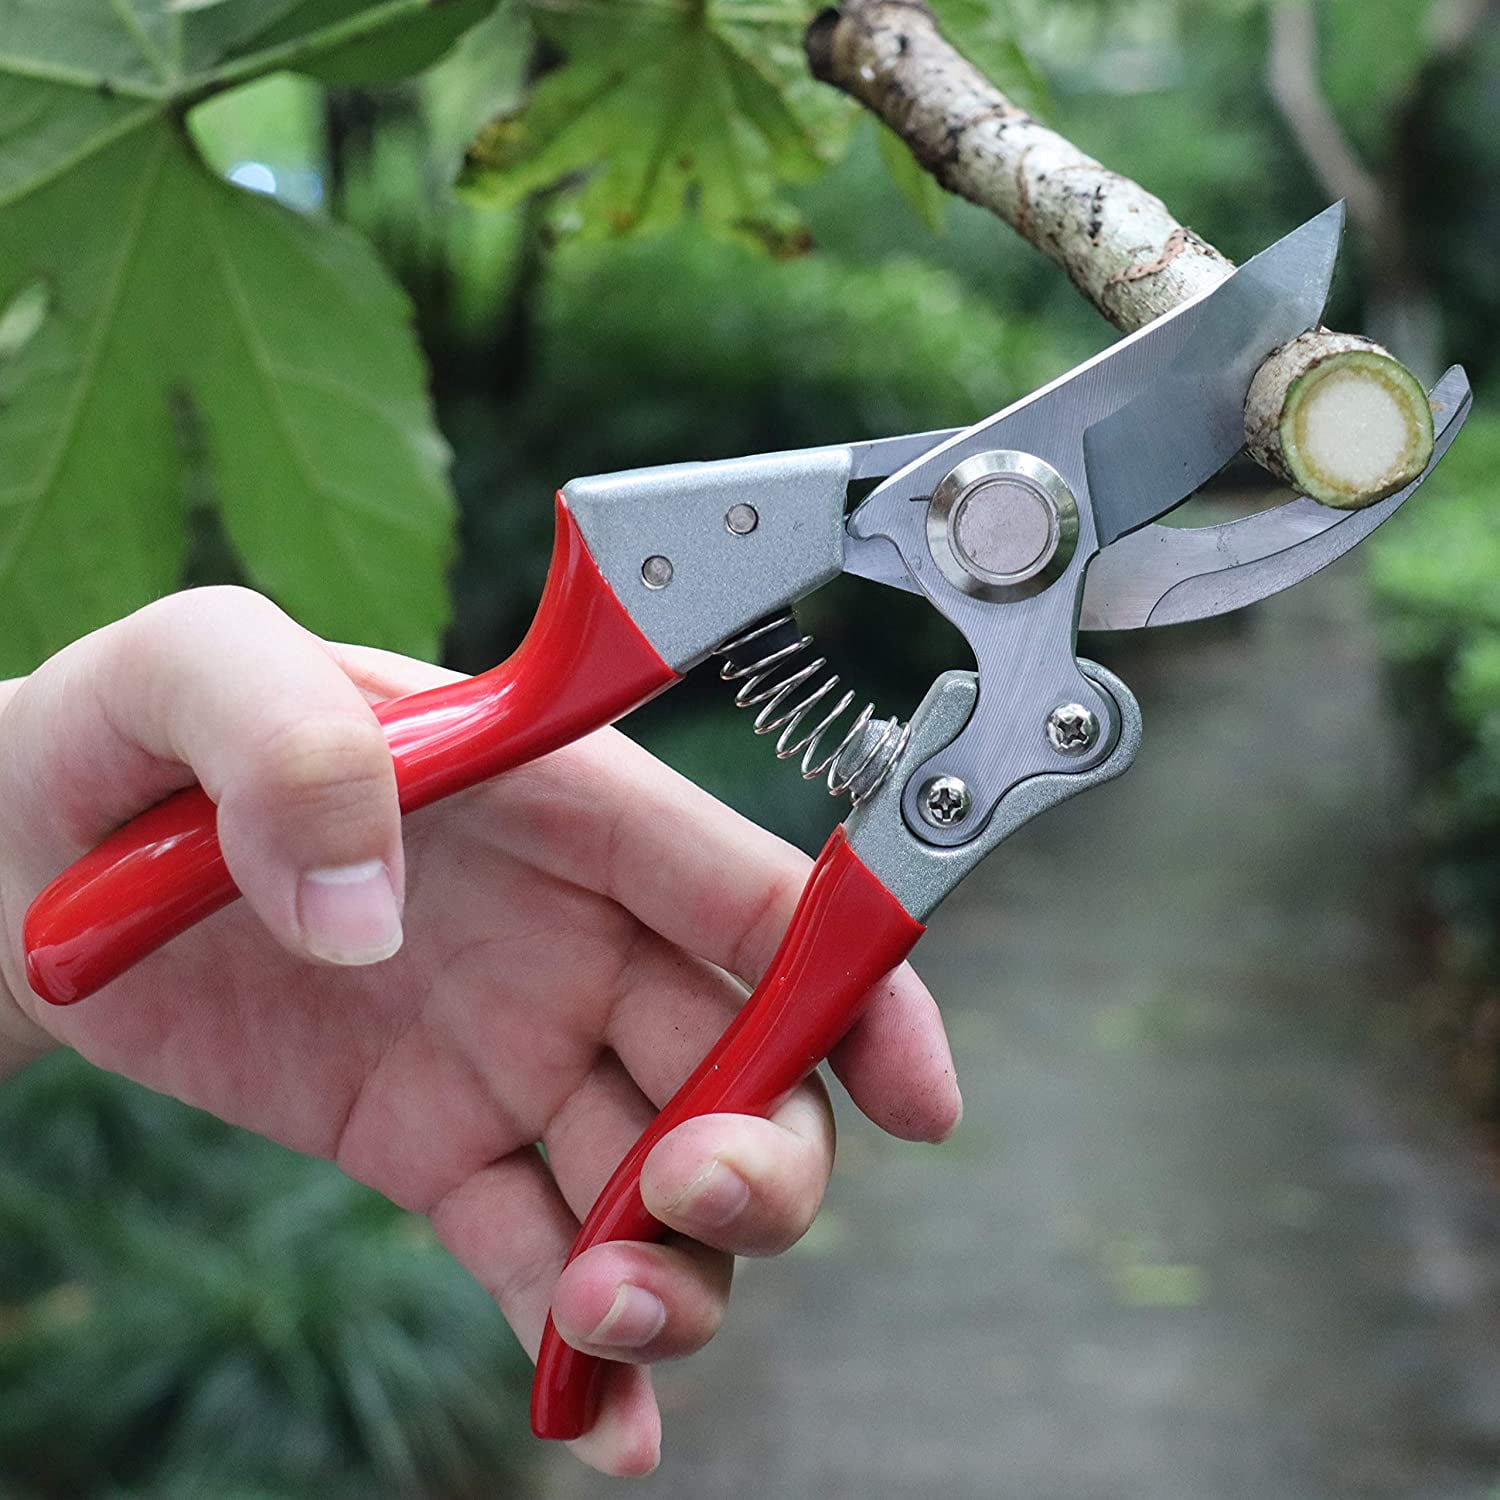 Heavy Duty Pruning Shears 8" Bypass Pruner Landscapers/Gardeners Cutting Tool 